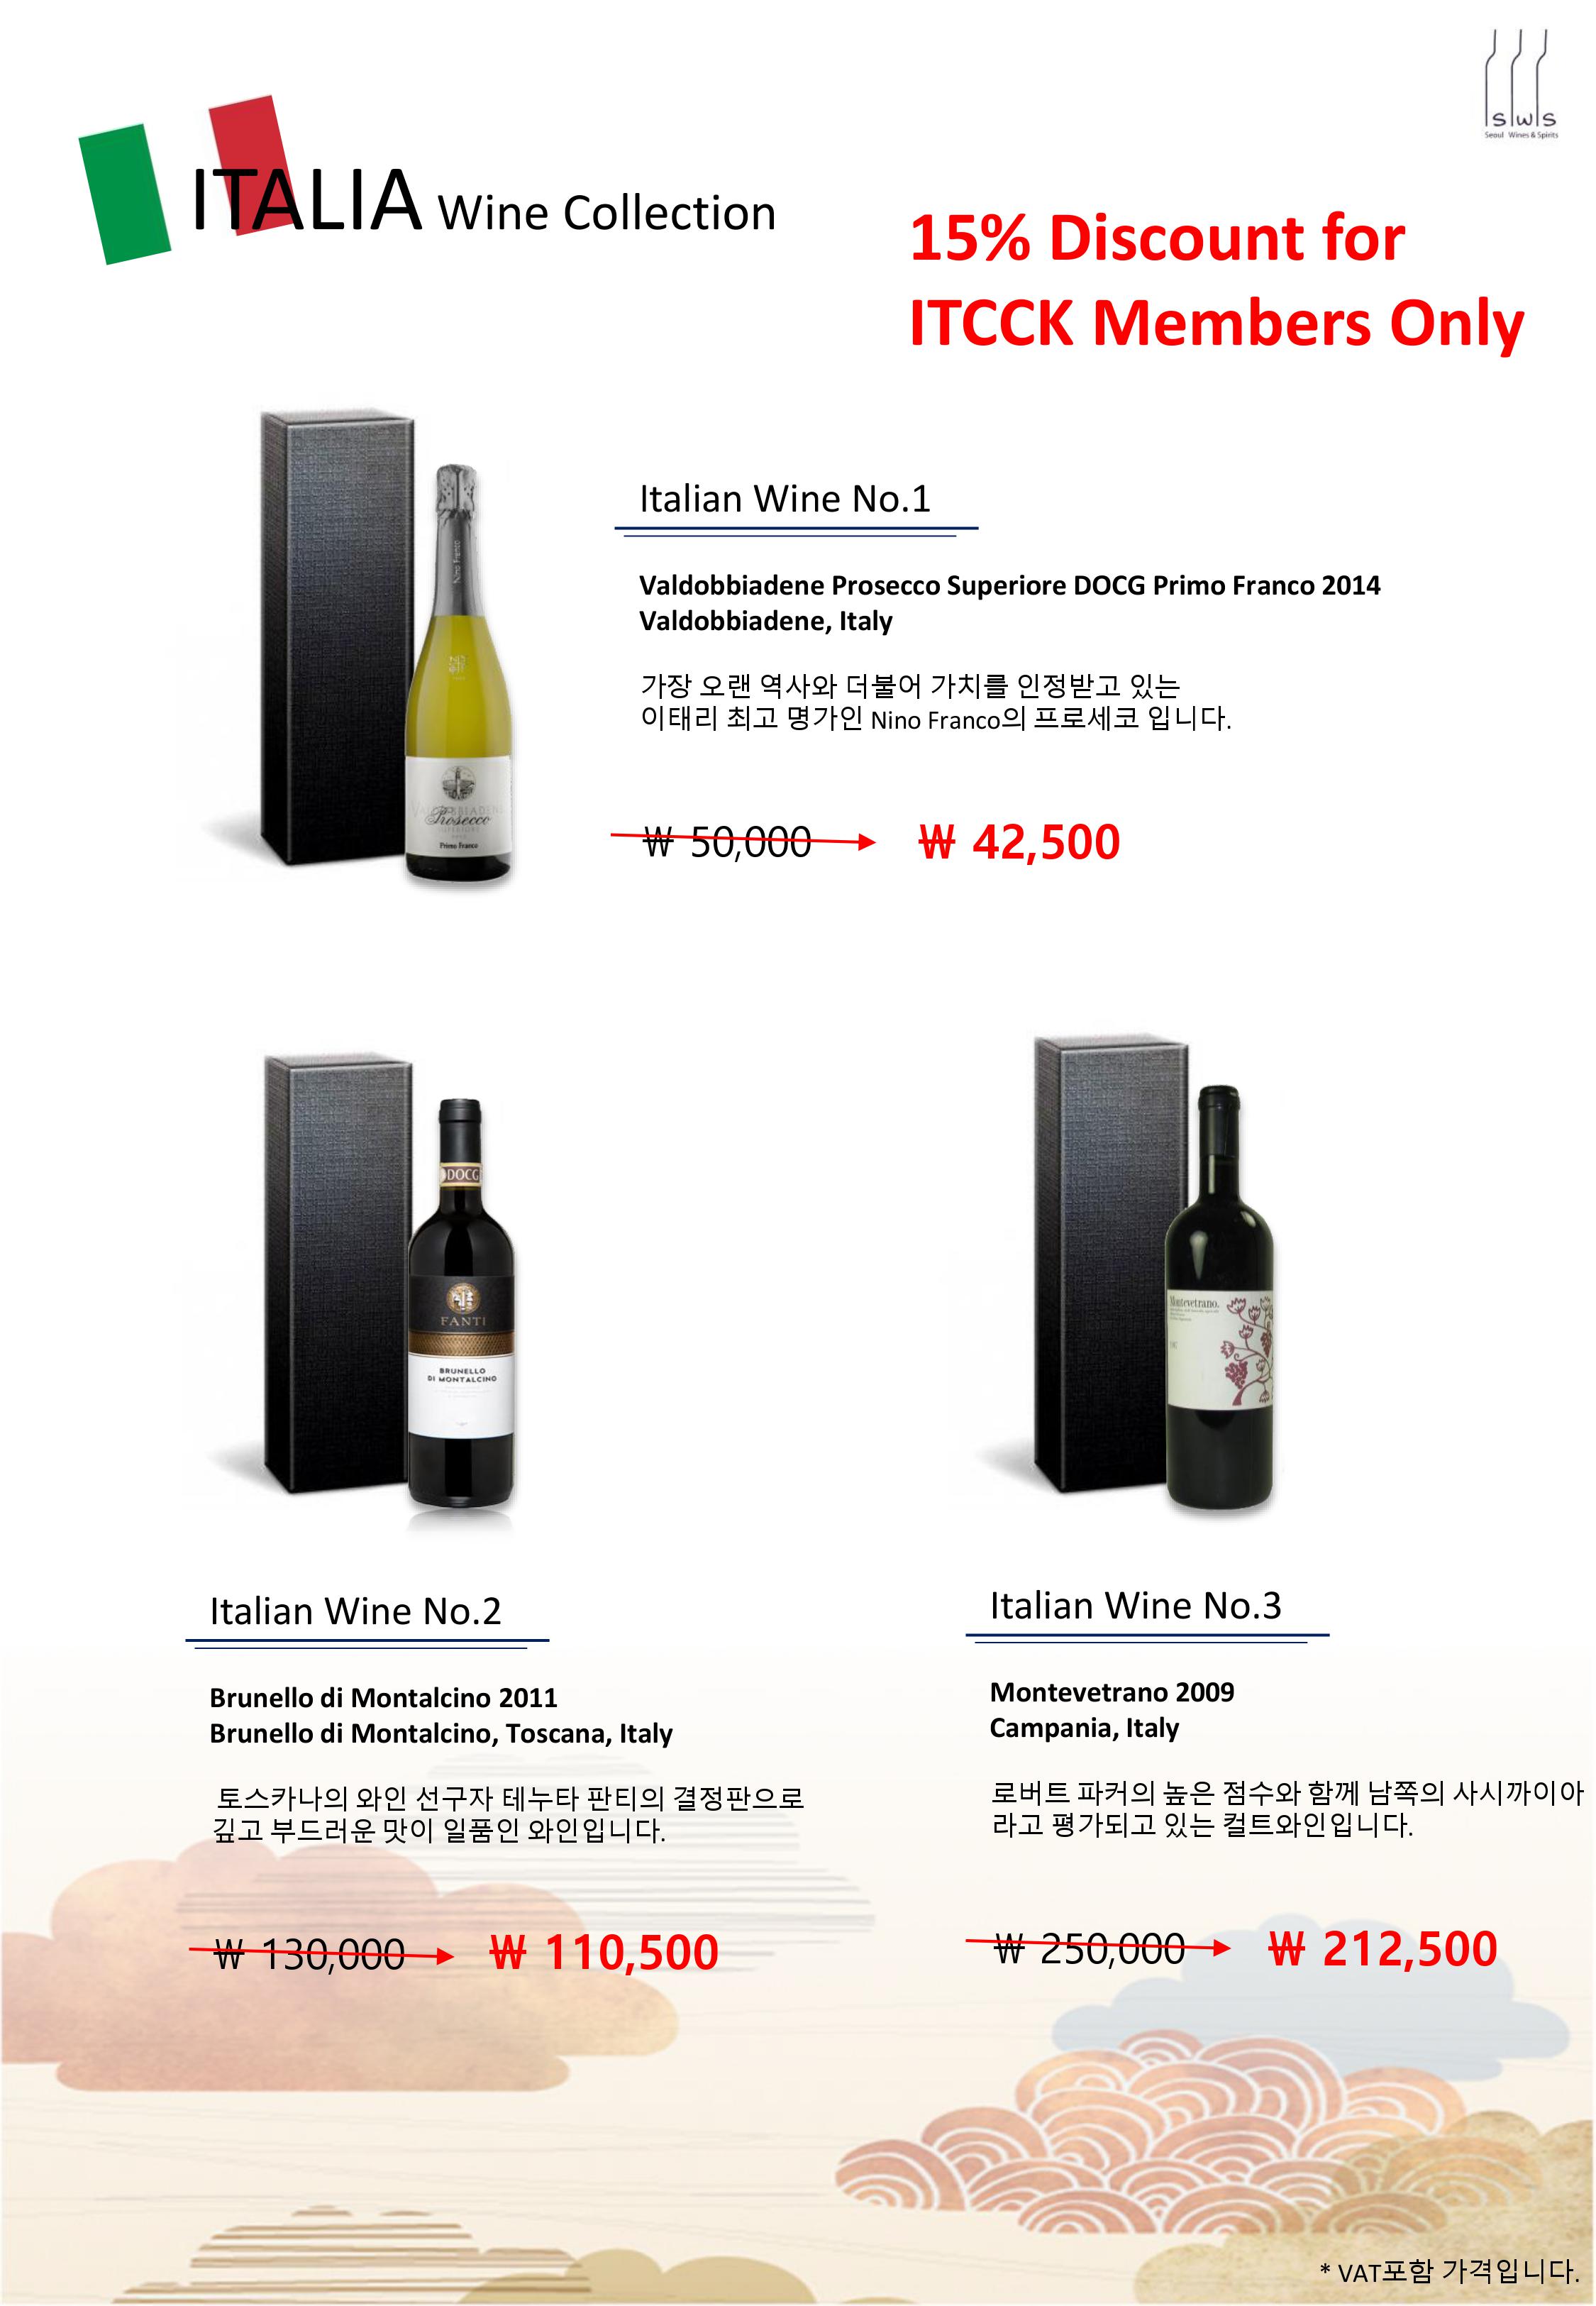 Seoul Wines & Spirits - Special Chuseok offer for ITCCK Members